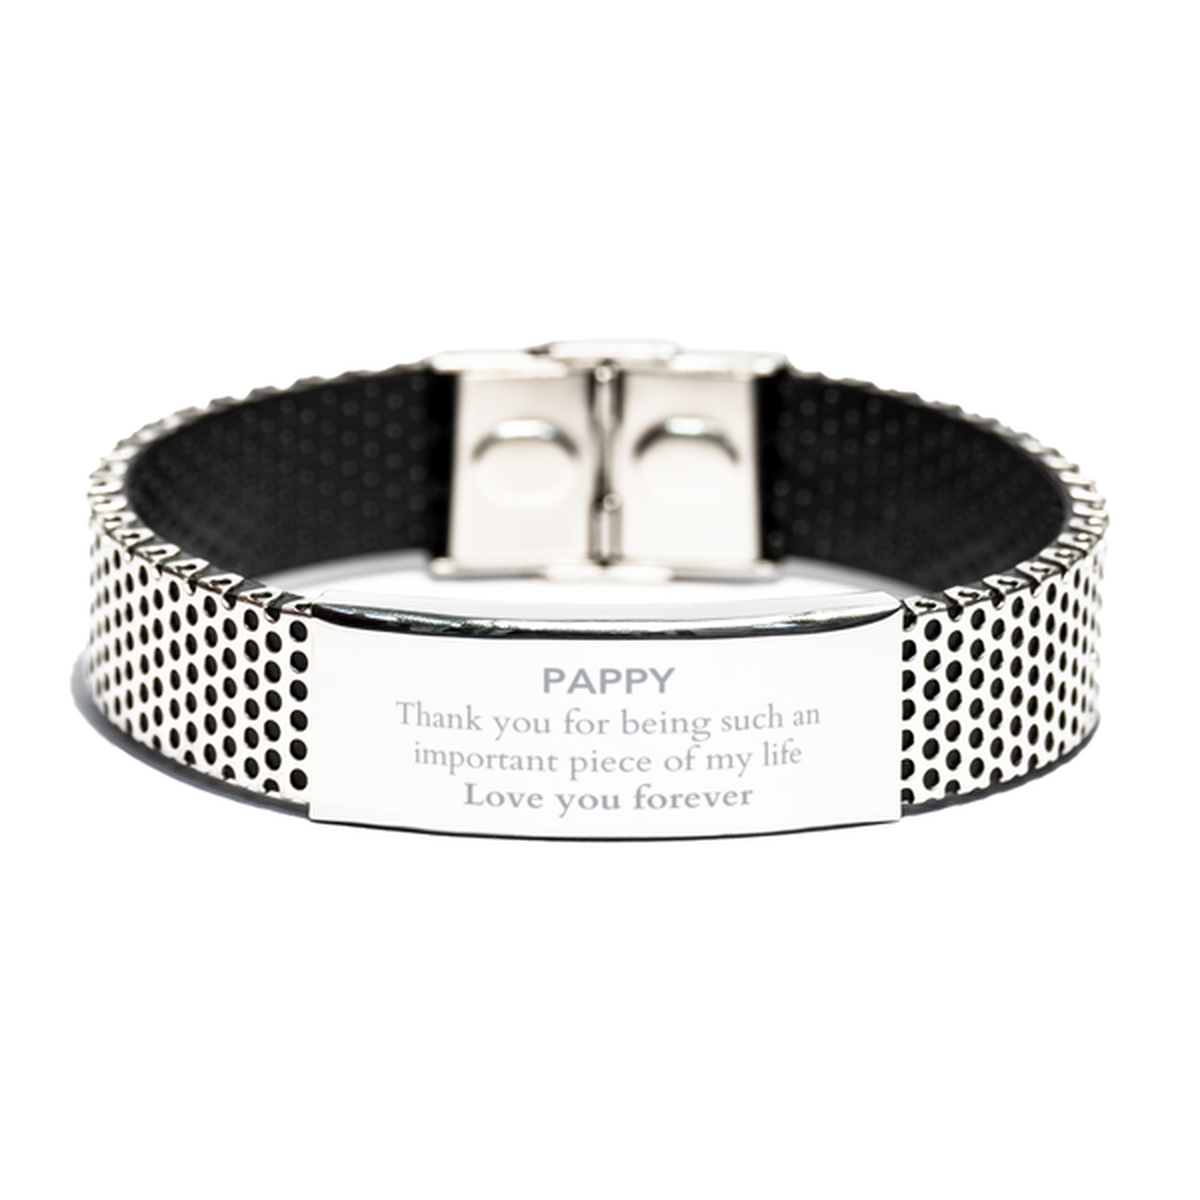 Appropriate Pappy Stainless Steel Bracelet Epic Birthday Gifts for Pappy Thank you for being such an important piece of my life Pappy Christmas Mothers Fathers Day